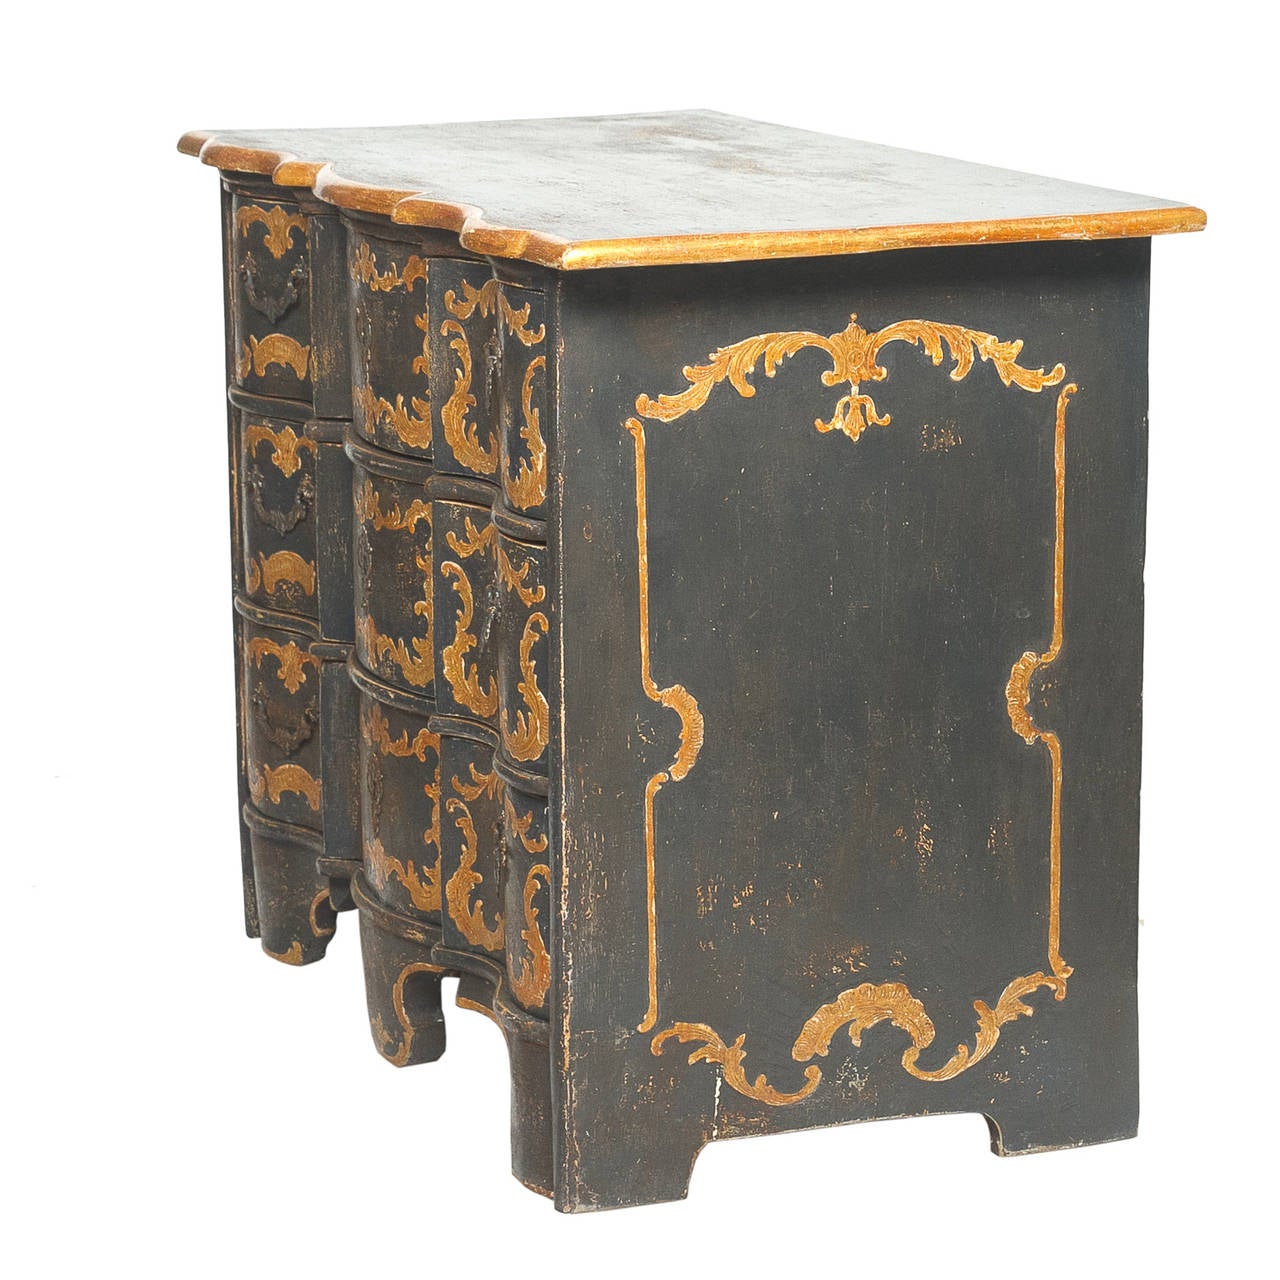 19th Century Continental Painted Commode

A spectacular early 19th century painted commode. Fabulous shape to the piece. The top is shaped to match the shape of the front and a exaggerated shaped apron and complimenting feet. The front and sides